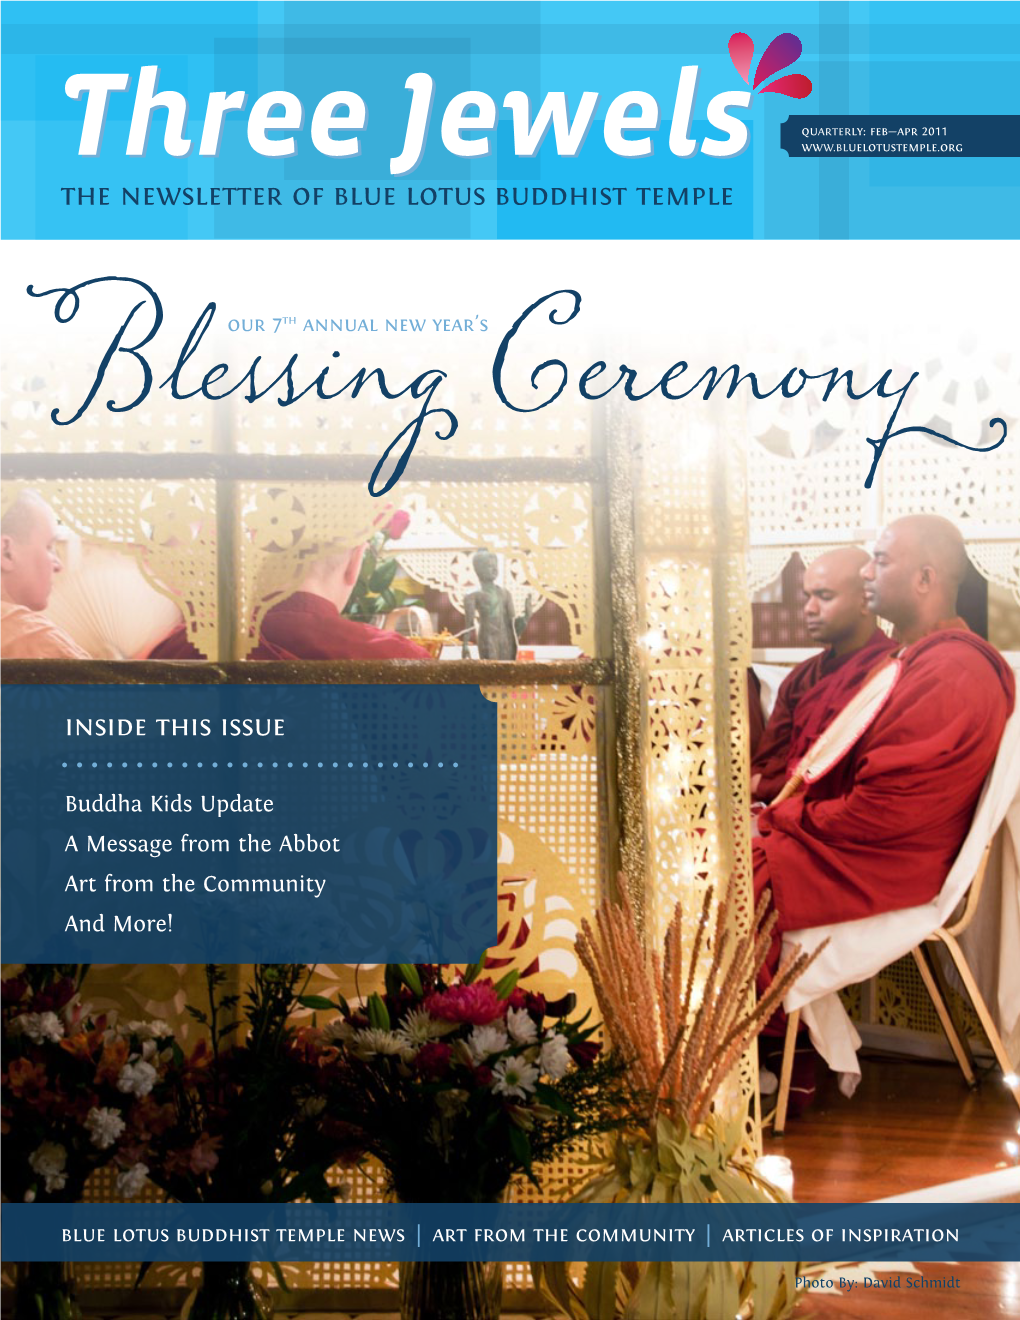 The Newsletter of Blue Lotus Buddhist Temple